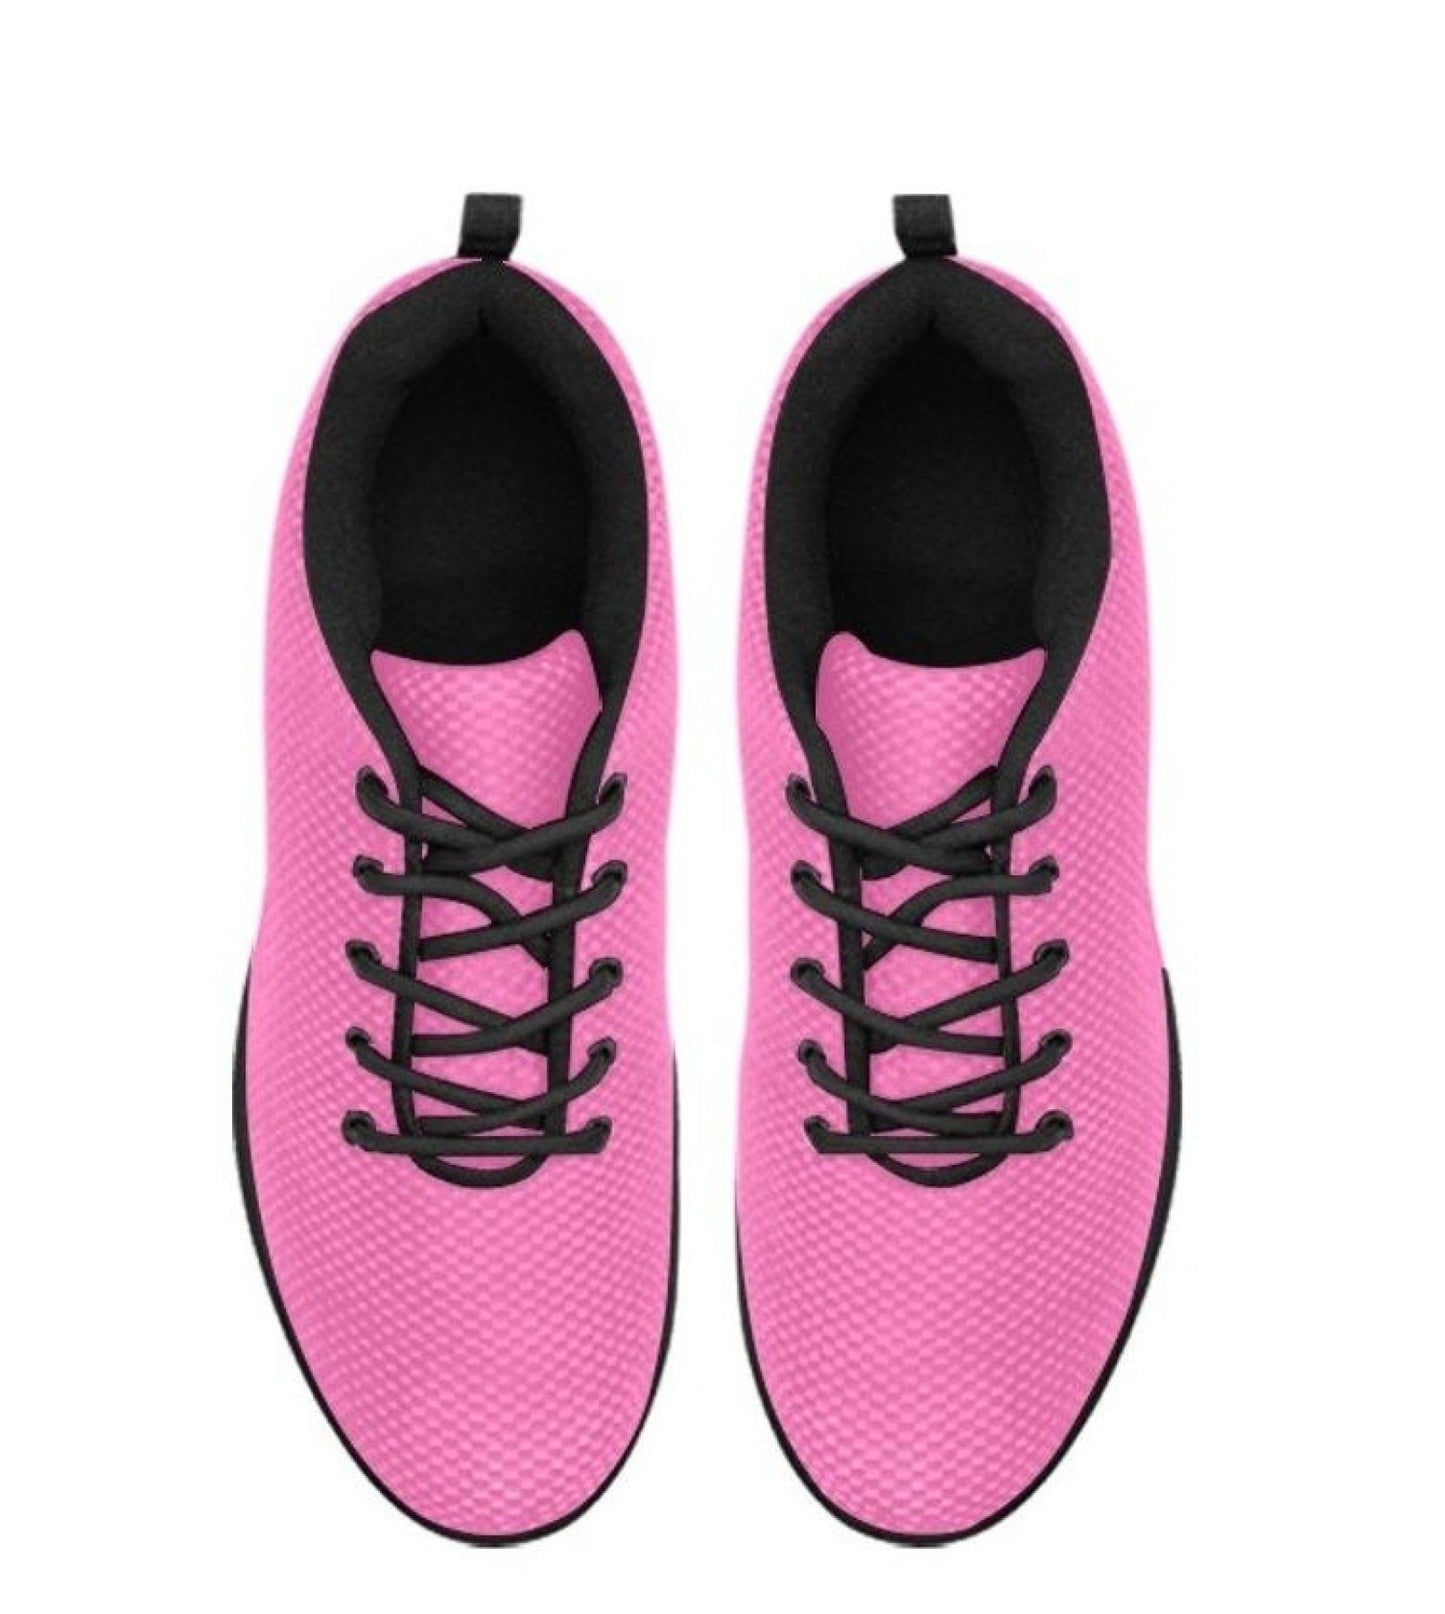 Sneakers For Women, Hot Pink And Black - Running Shoes